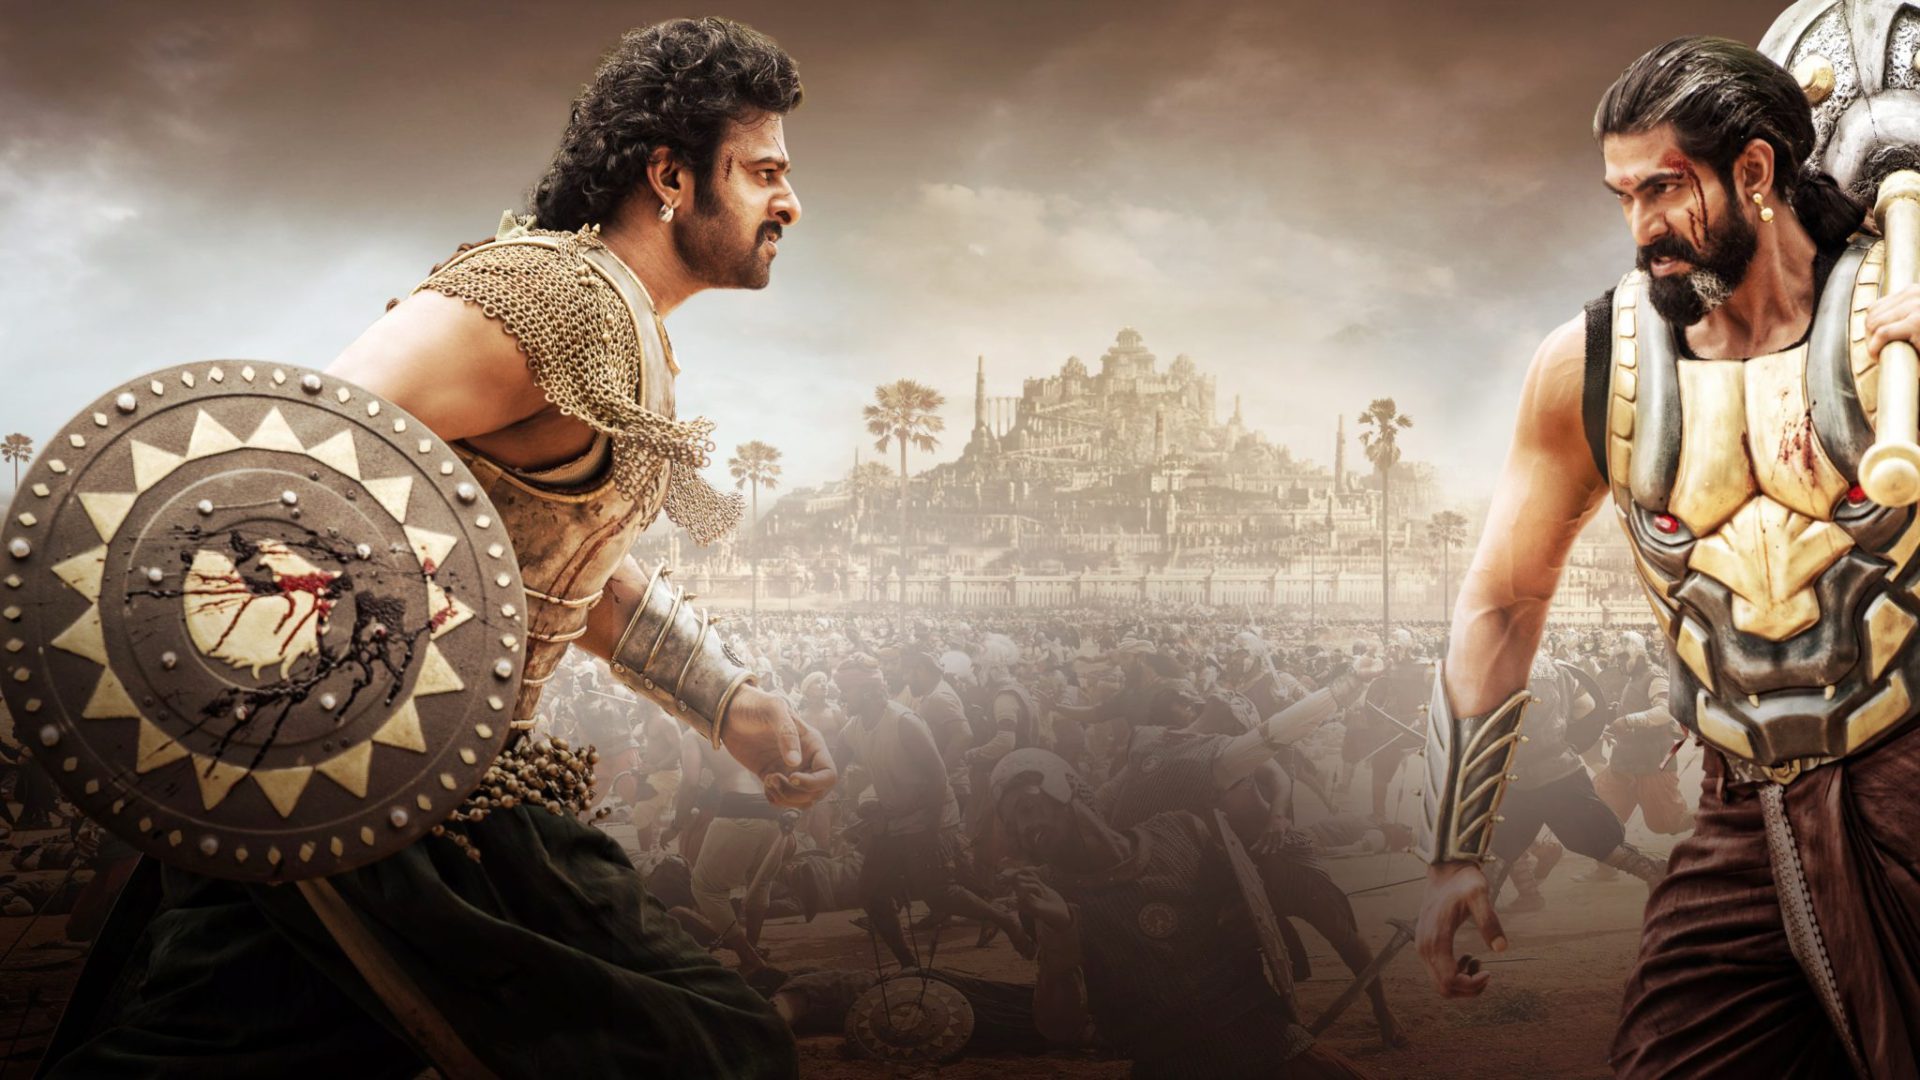 Baahubali 2: The Conclusion Wallpapers